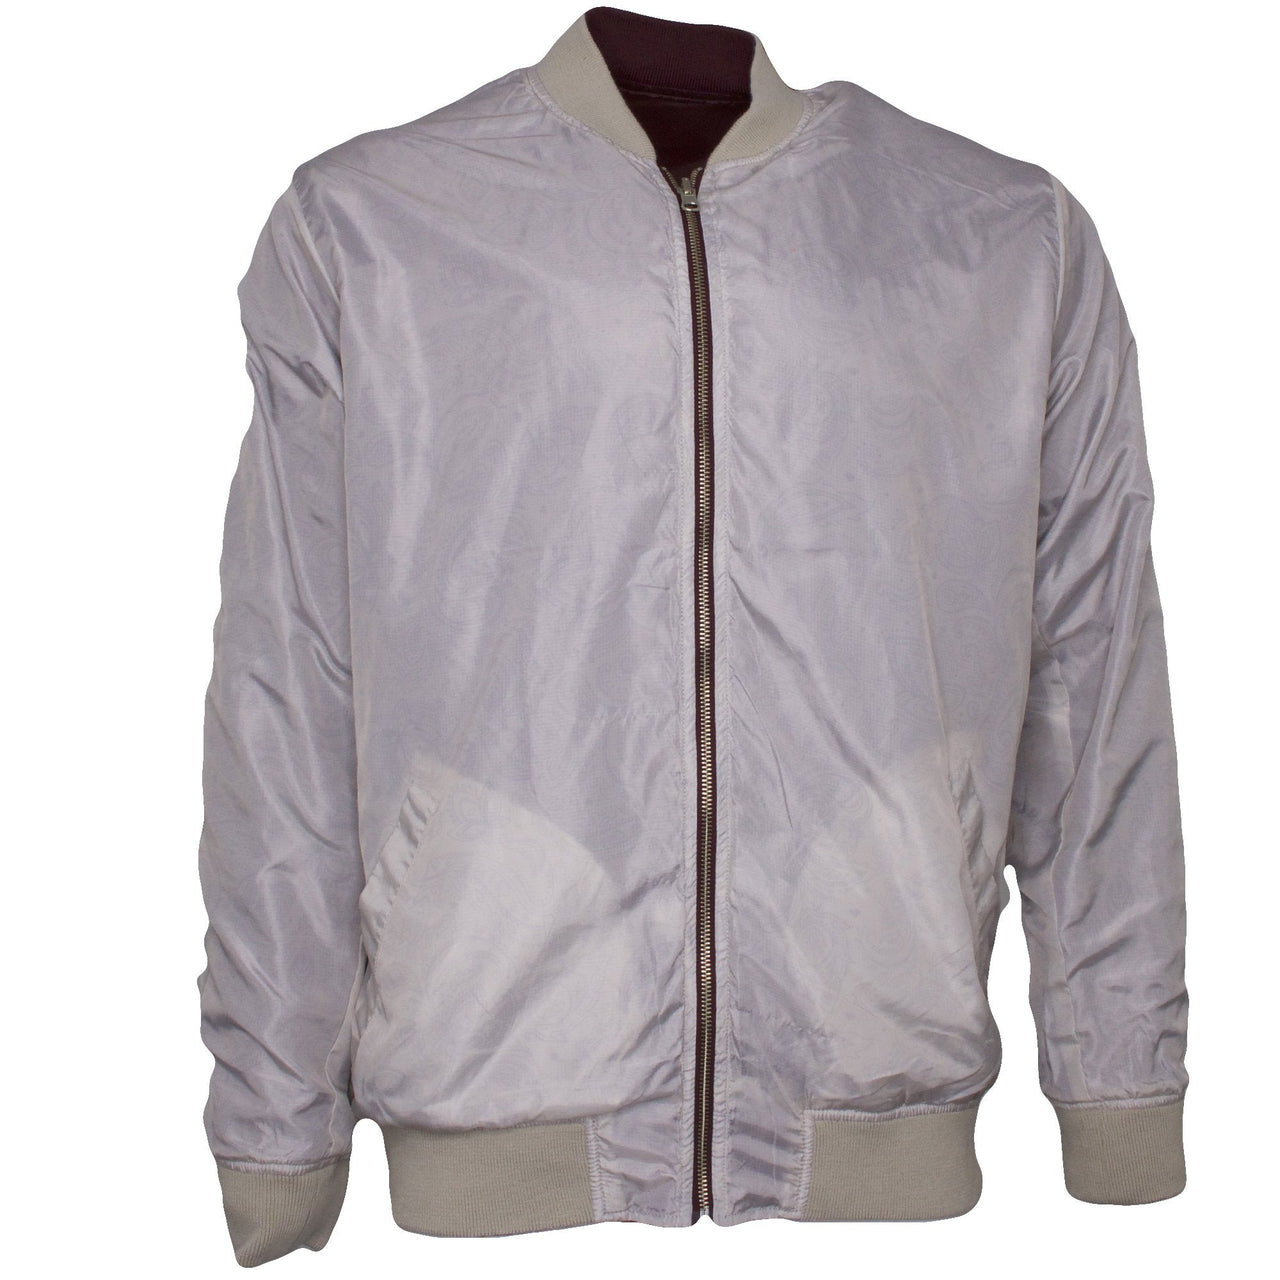 the interior of the reversible burgundy and cream bomber jacket is cream